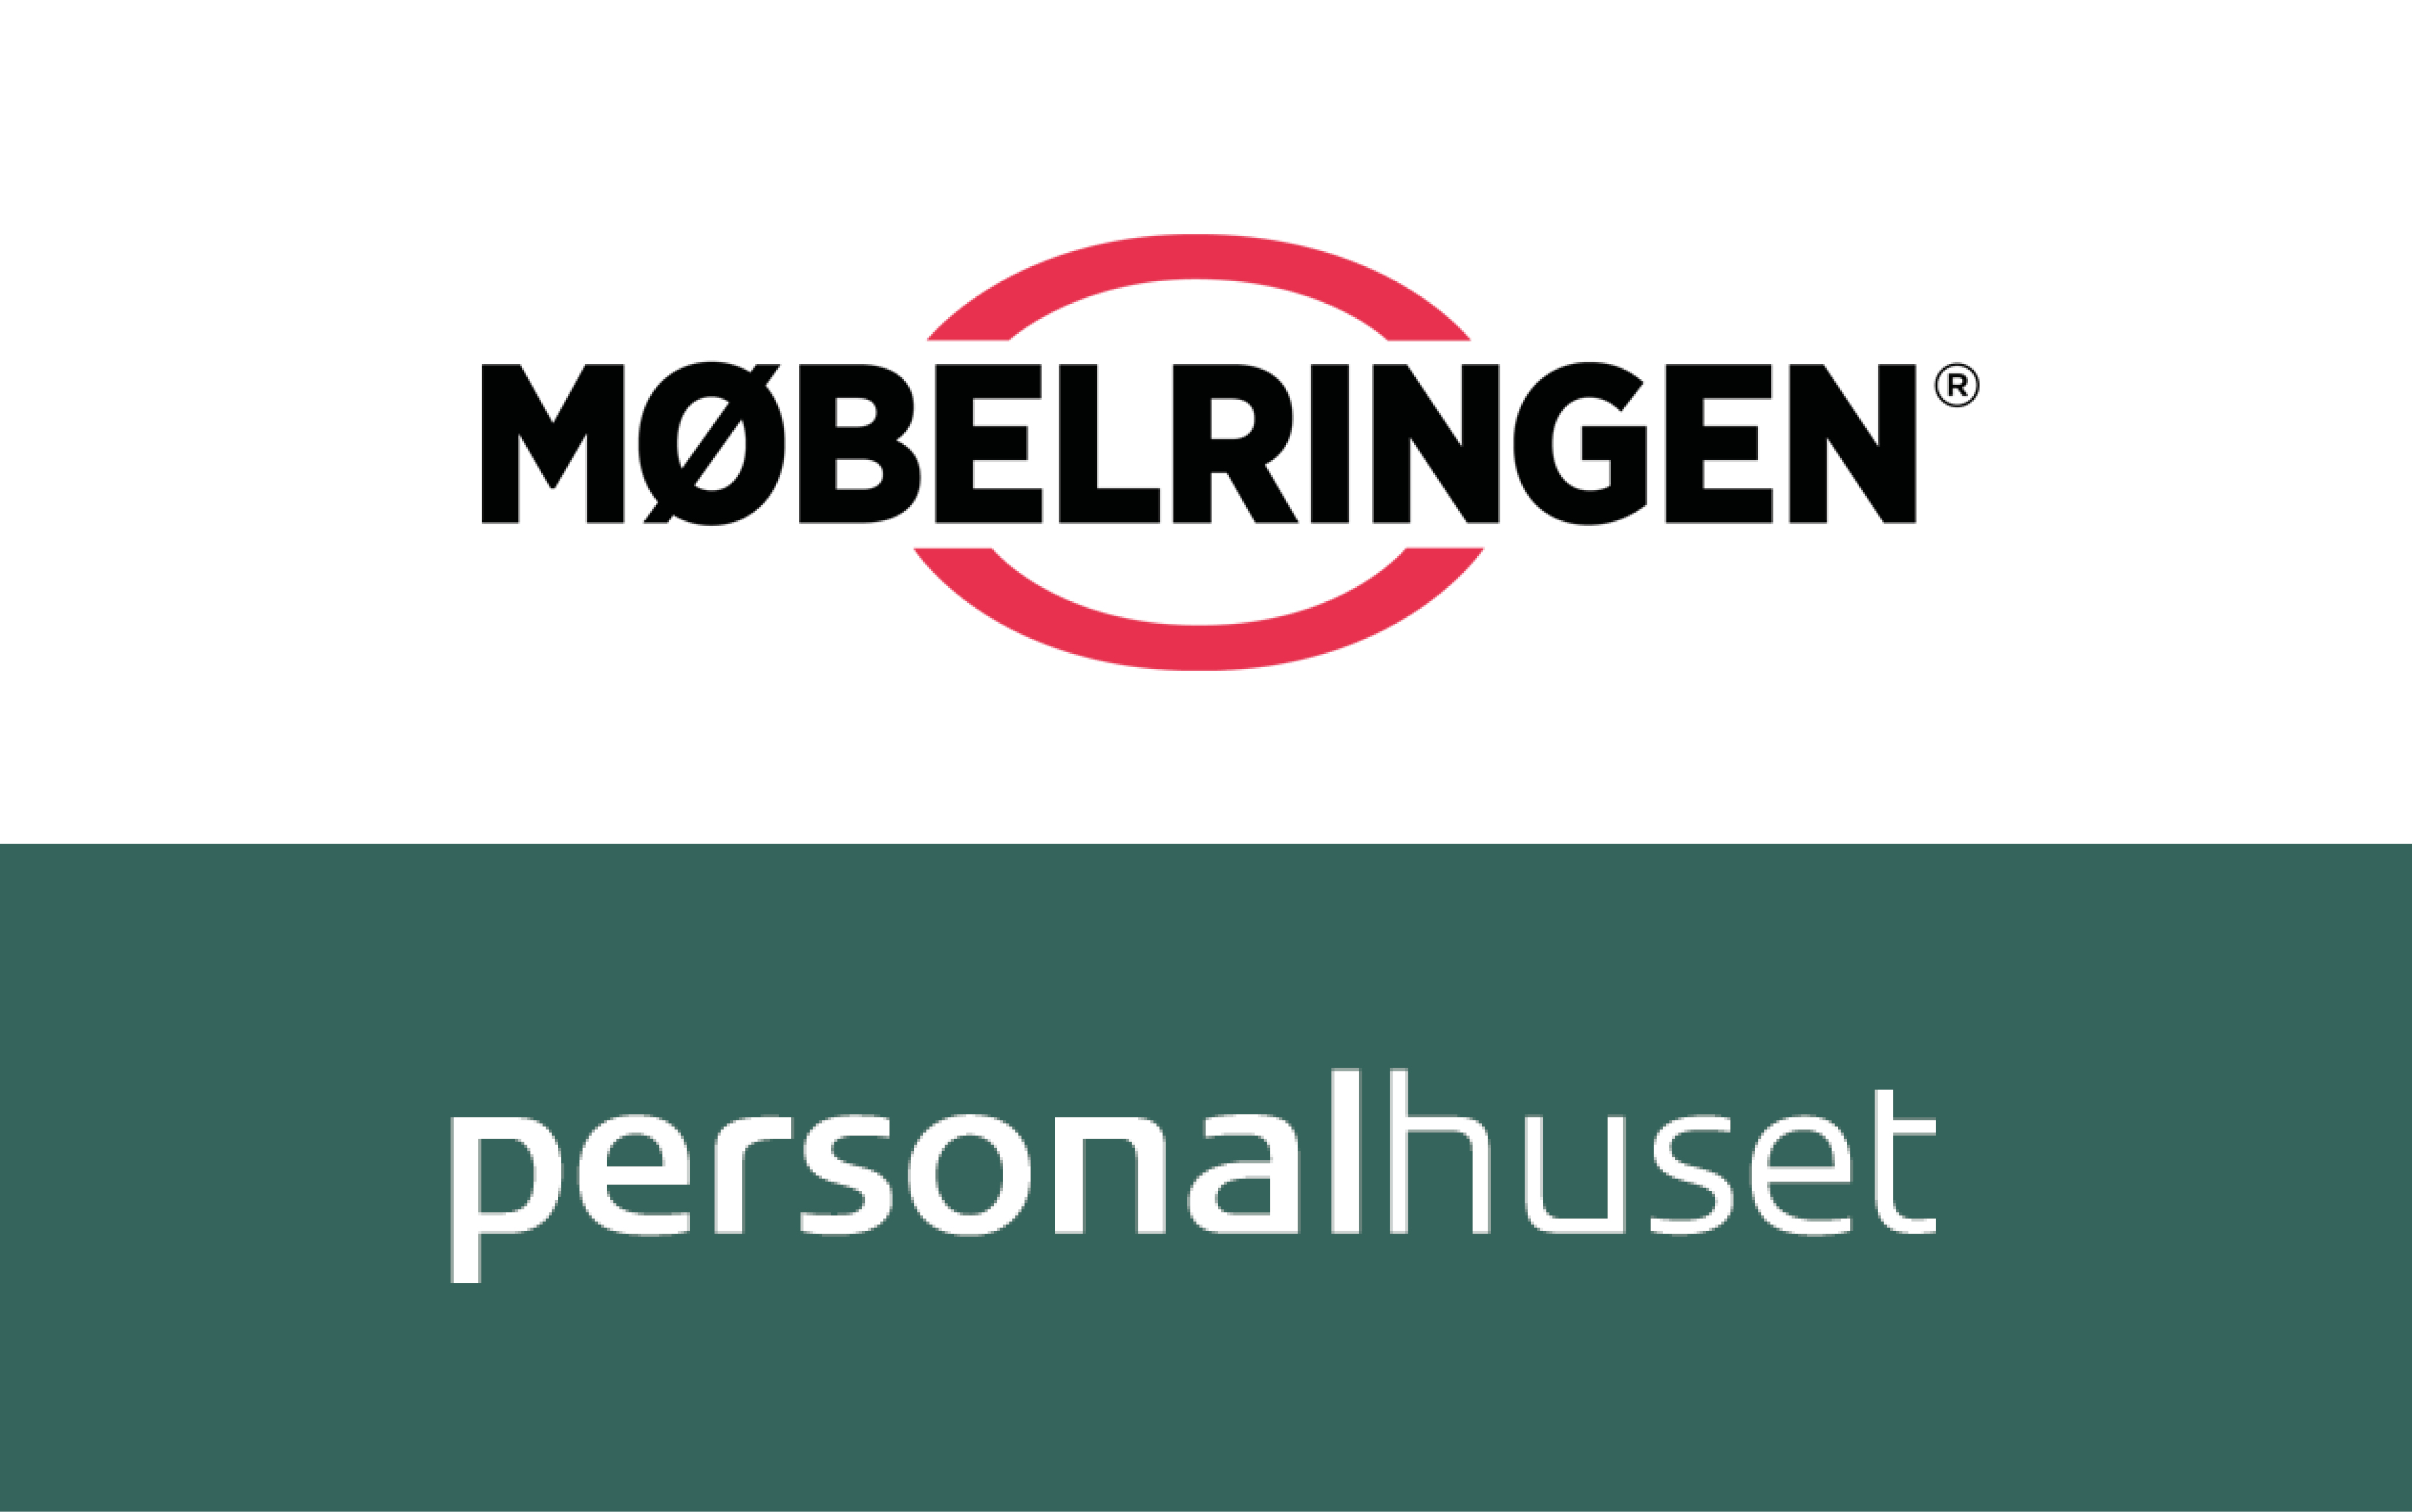 Personalhuset Staffing Group AS